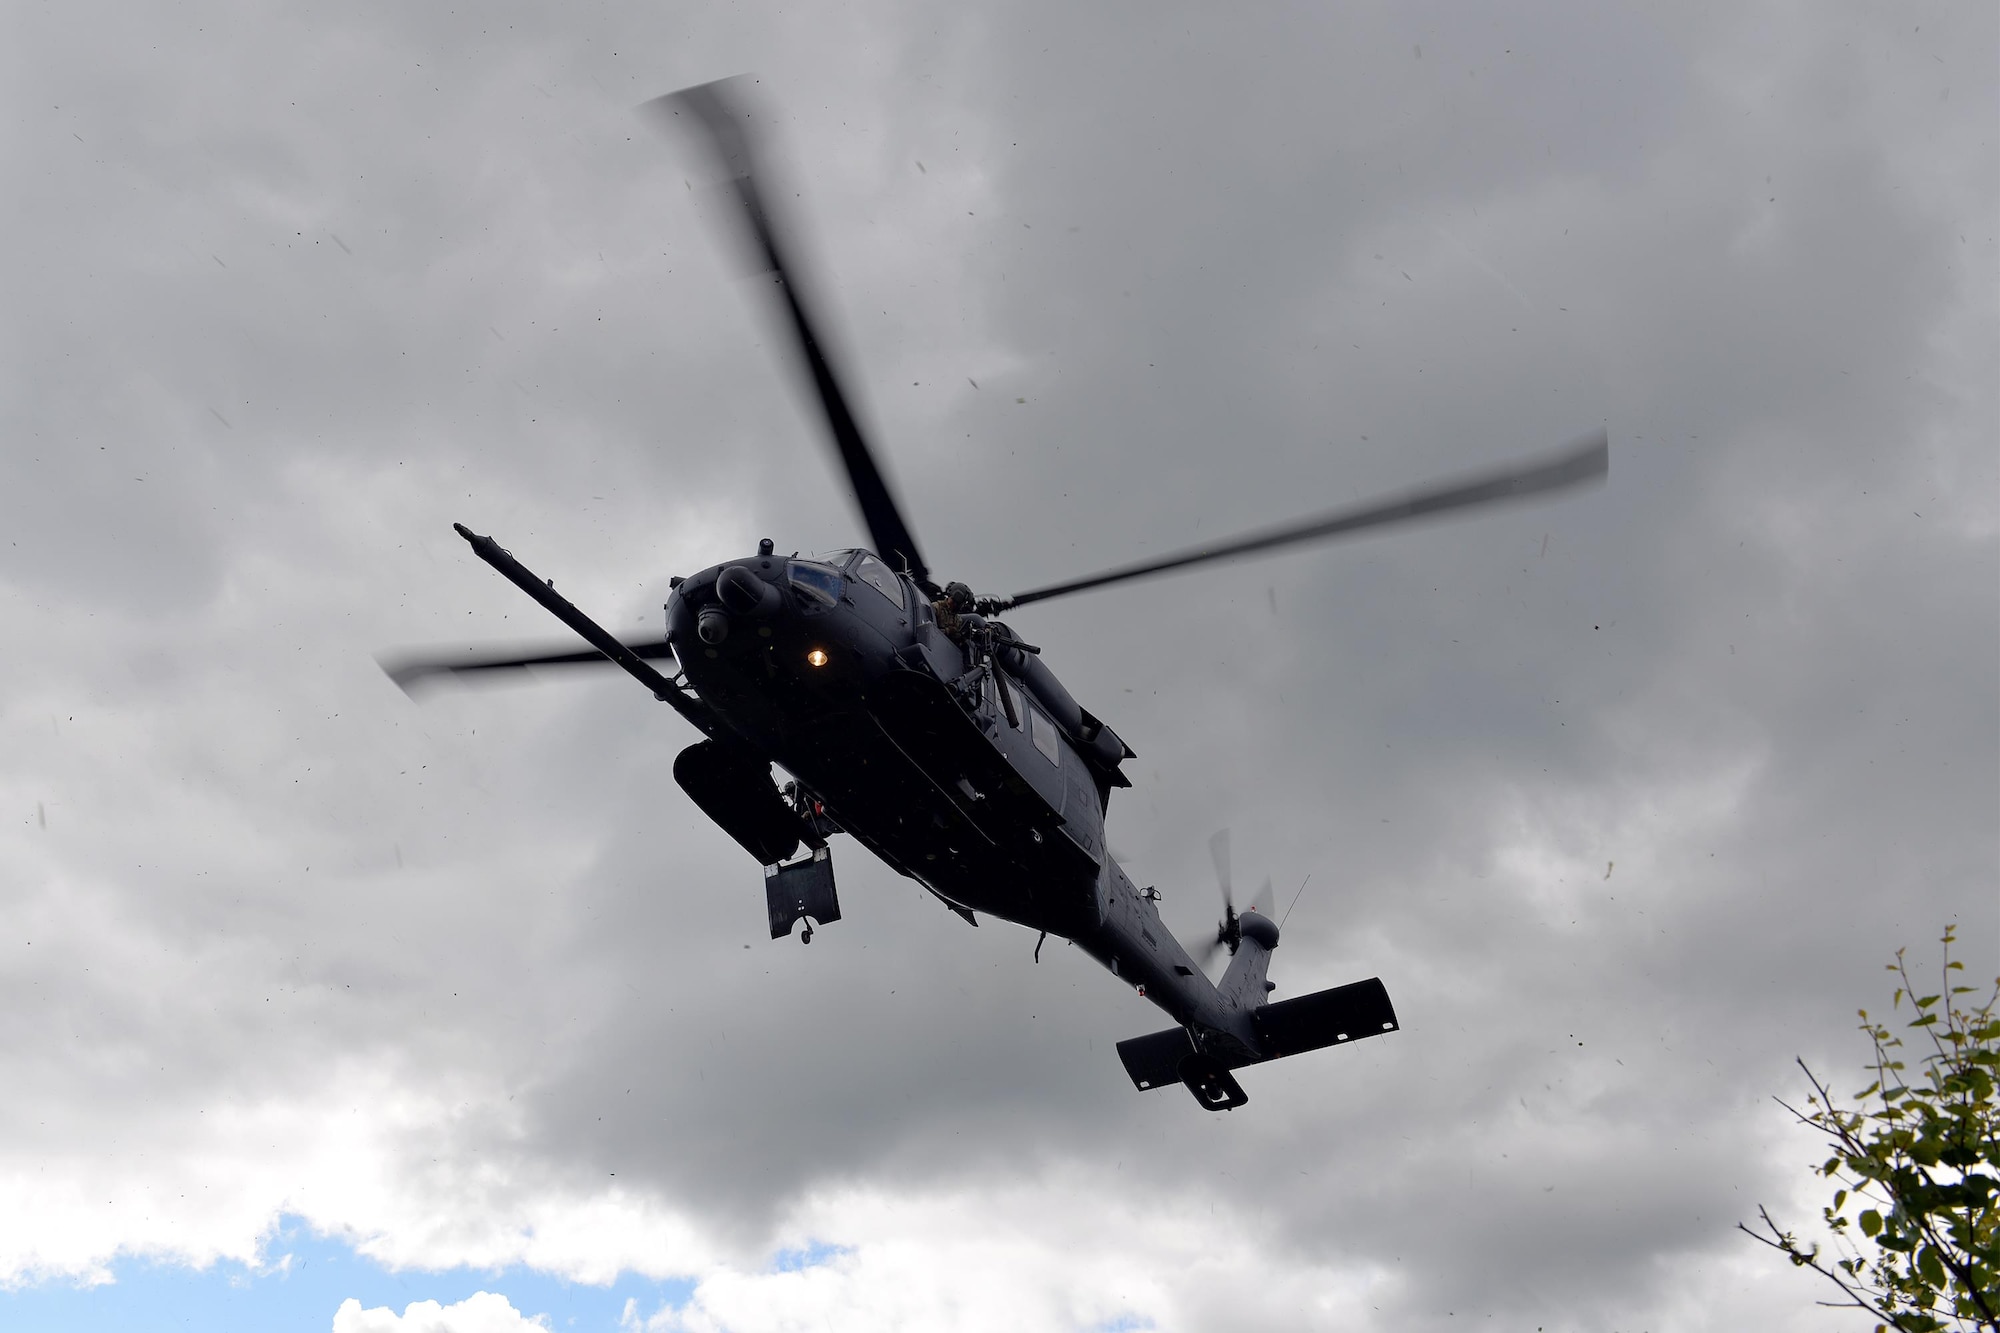 An HH-60G Pave Hawk helicopter and rescue crew assigned to the Alaska Air National Guard's 210th Rescue Squadron Detachment 1 approaches a pilot waiting at an extraction site inside the Joint Pacific Alaska Range Complex, as part of a personnel recovery exercise June 14, 2016, during RED FLAG-Alaska 16-2. The primary goal of the 353rd Combat Training Squadron's personnel recovery division is to develop effective rescue scenarios for joint and international forces, which provides unique opportunities for to integrate various forces into joint, coalition and multilateral training from simulated forward operating bases. (U.S. Air Force photo by Master Sgt. Karen J. Tomasik)